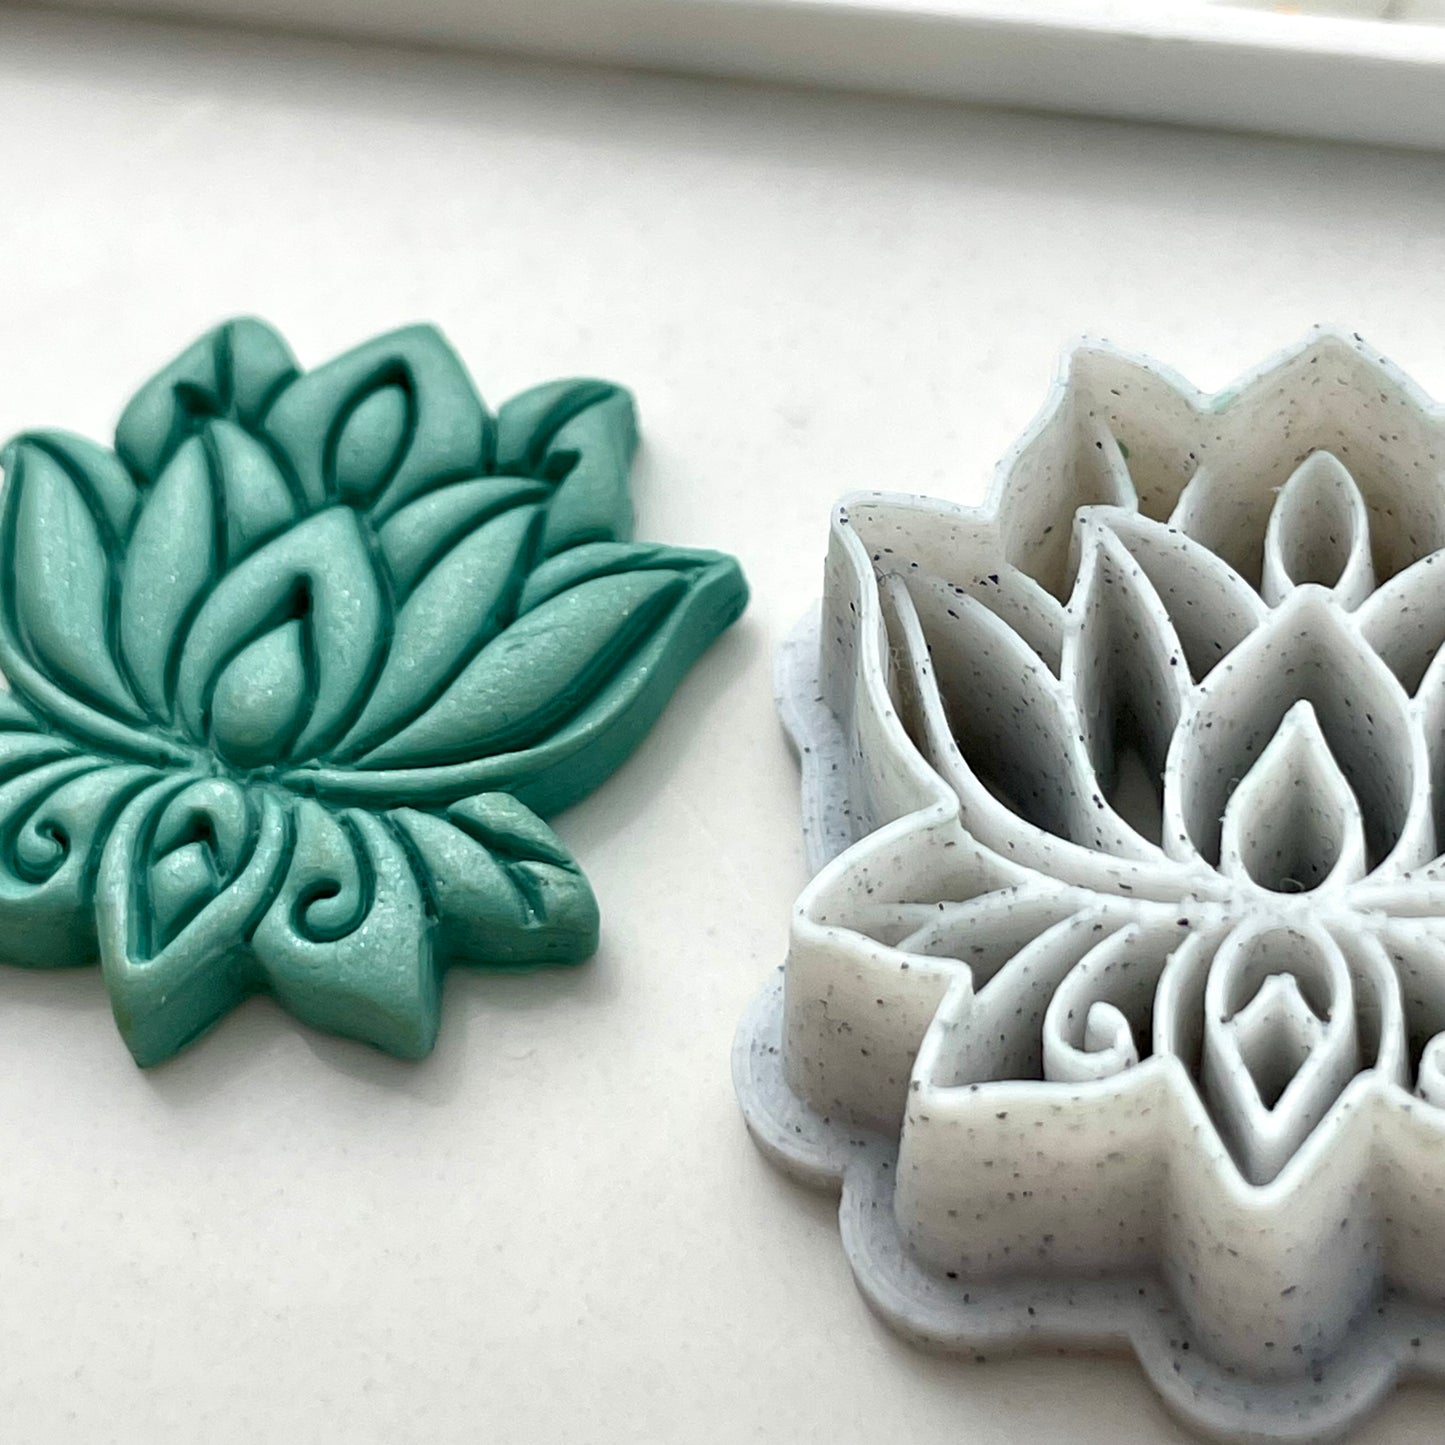 Lotus combined stamp/cutter